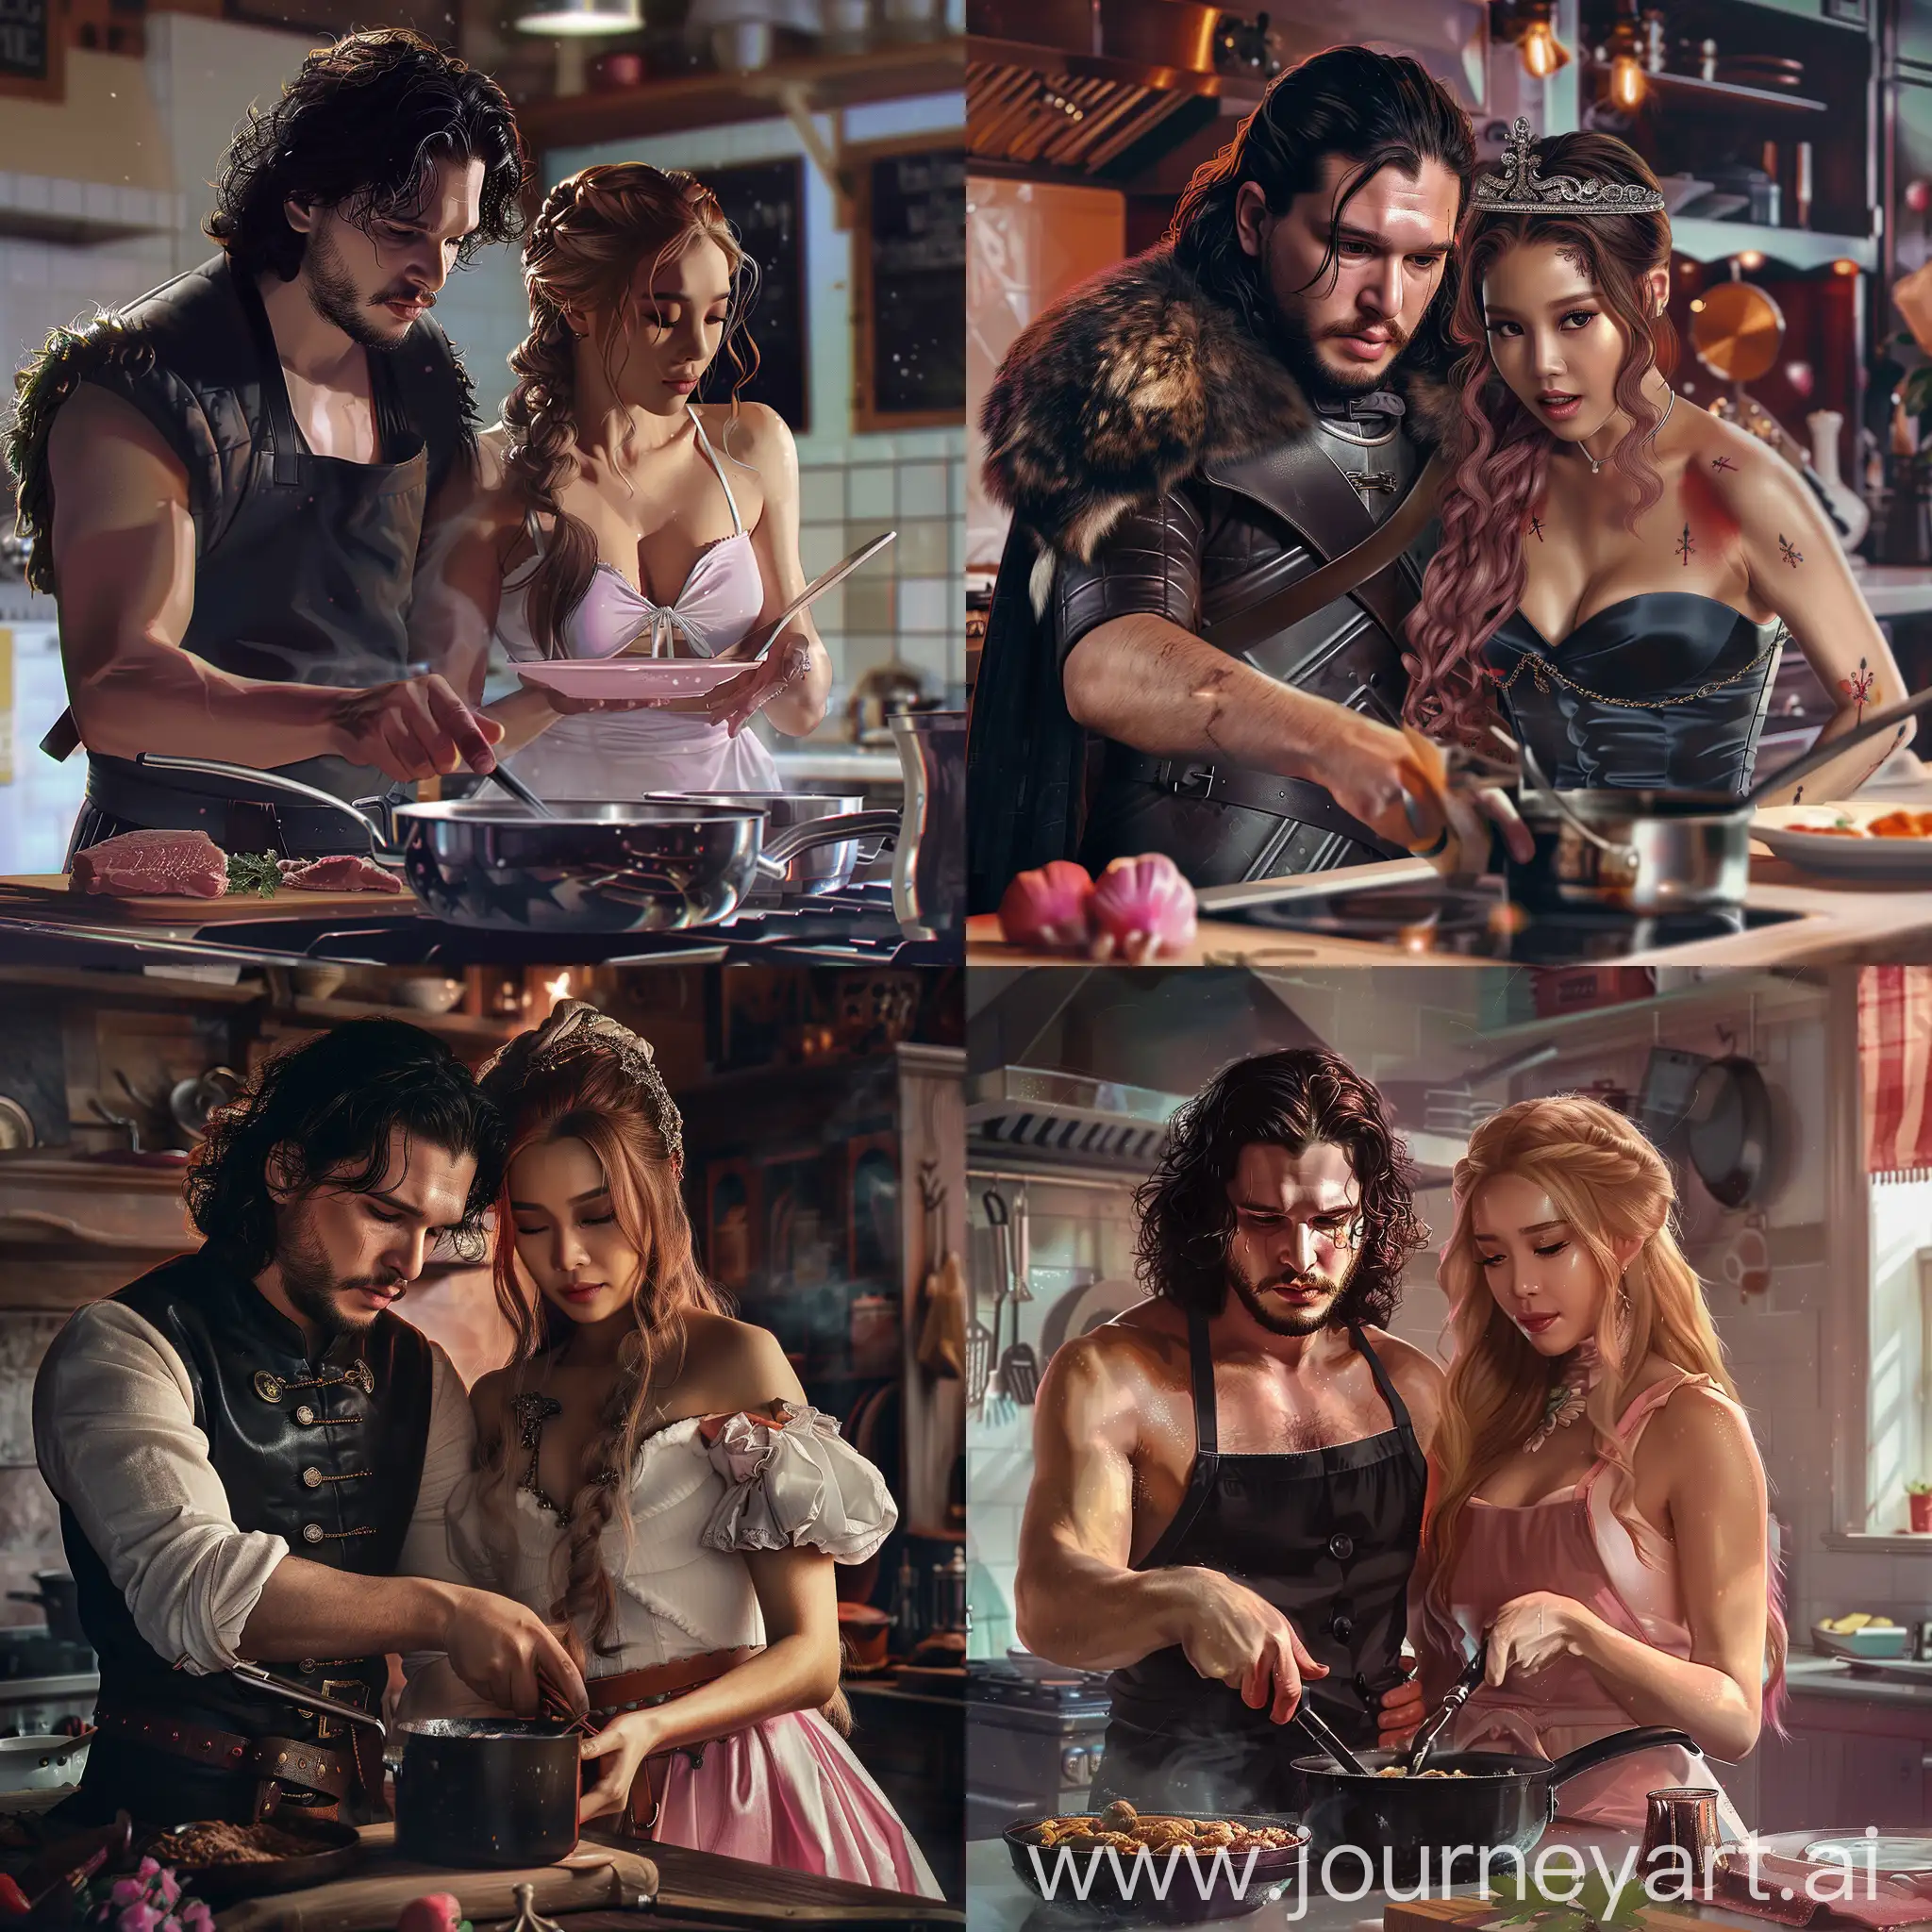 Jon-Snow-and-Jennie-from-Blackpink-Cooking-Together-in-a-Photorealistic-Kitchen